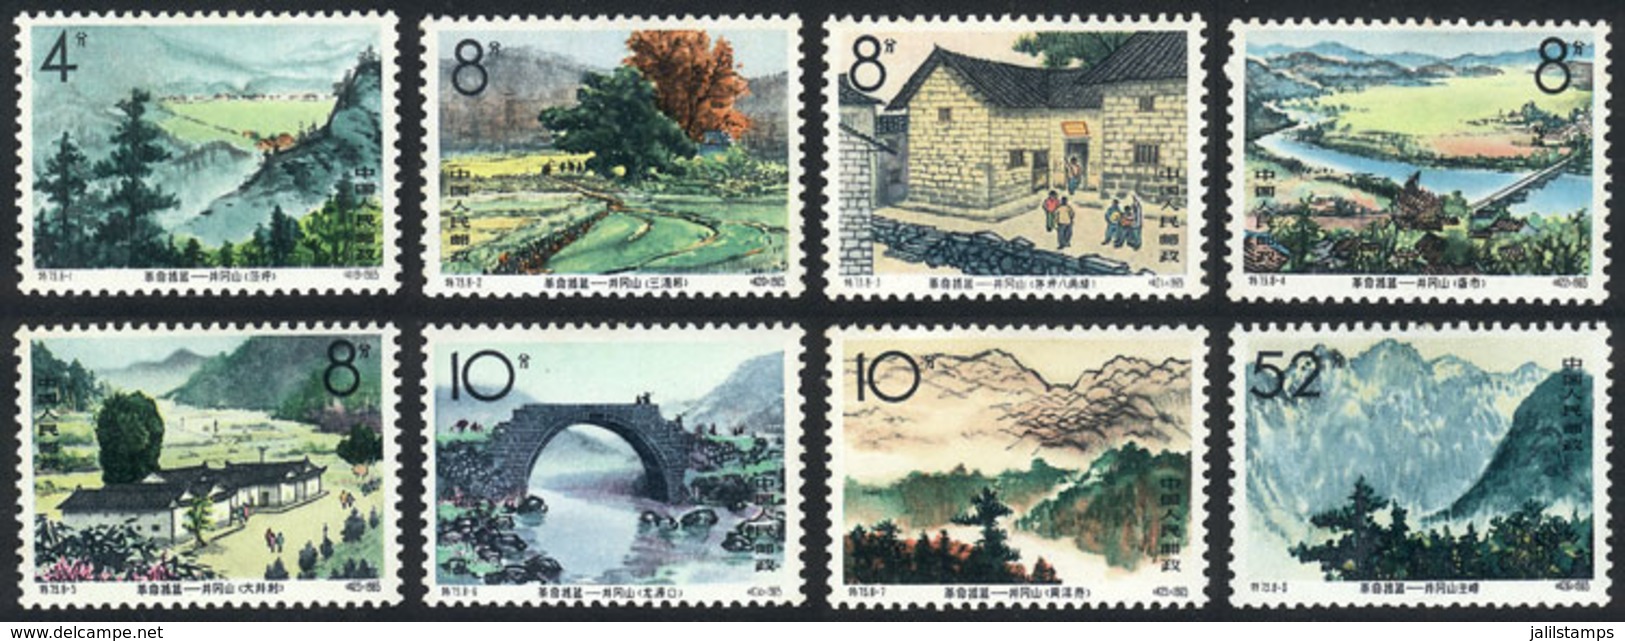 CHINA: Sc.834/841, 1965 Jinggangshan Mountain, Cmpl. Set Of 8 Values, Mint Very Lightly Hinged, VF Quality! - Used Stamps